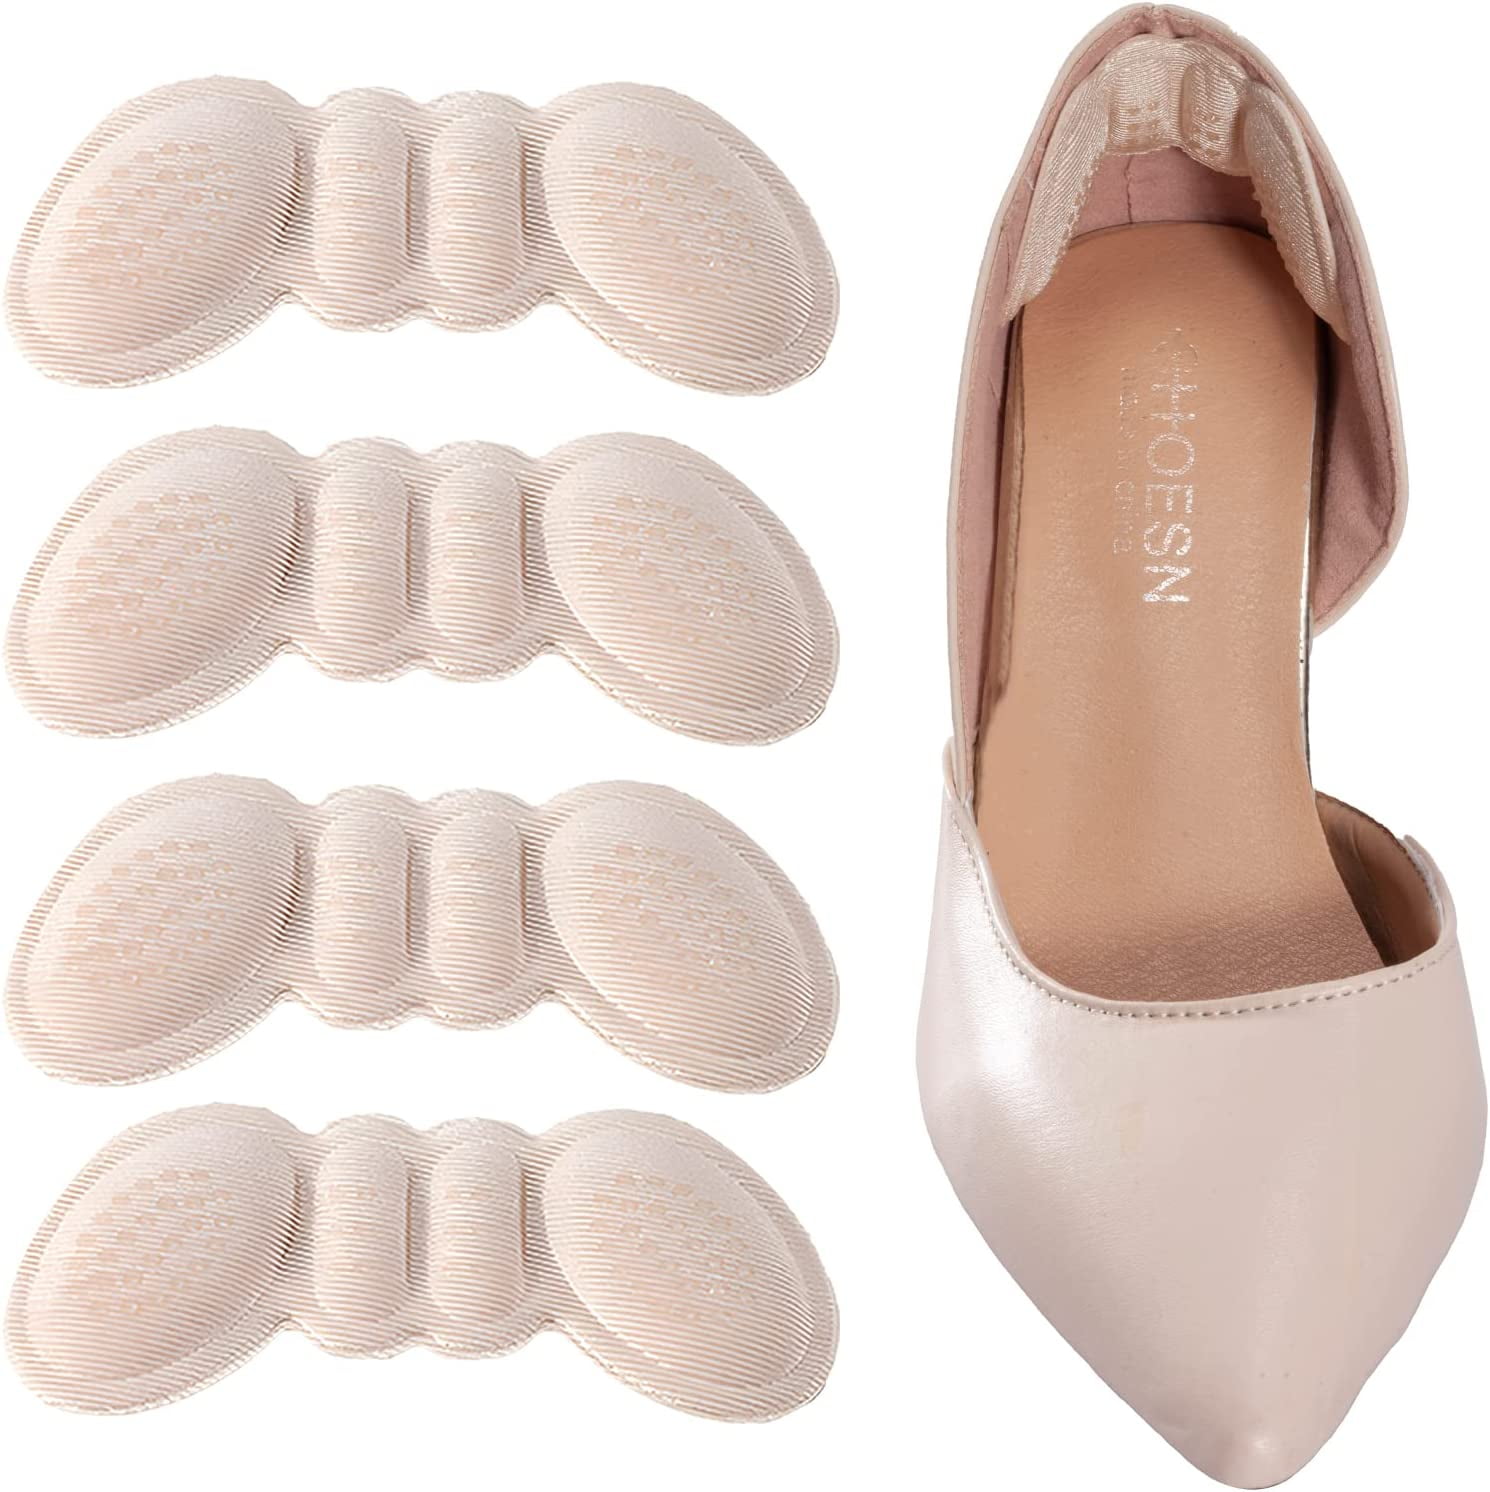 Heel Grips Liner Cushions Inserts for Loose Shoes Heel Pads and Metatarsal  Pads for Shoes Too Big Women Men Prevent Heel Pain Blisters (Beige+Black) -  Walmart.com